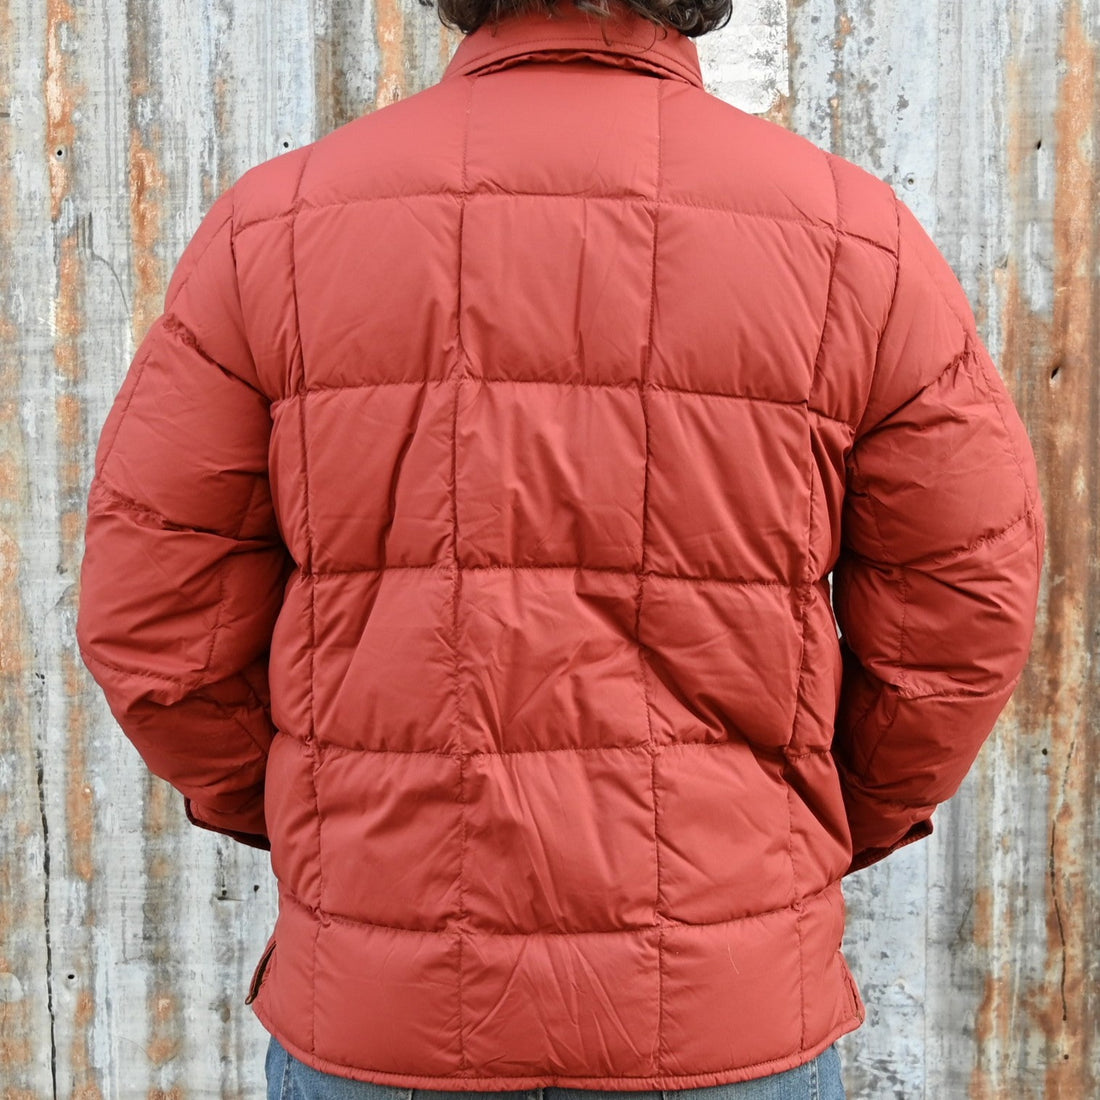 Filson Lightweight Down Jacket Shirt in Madder Red view of back of jacket on model size M